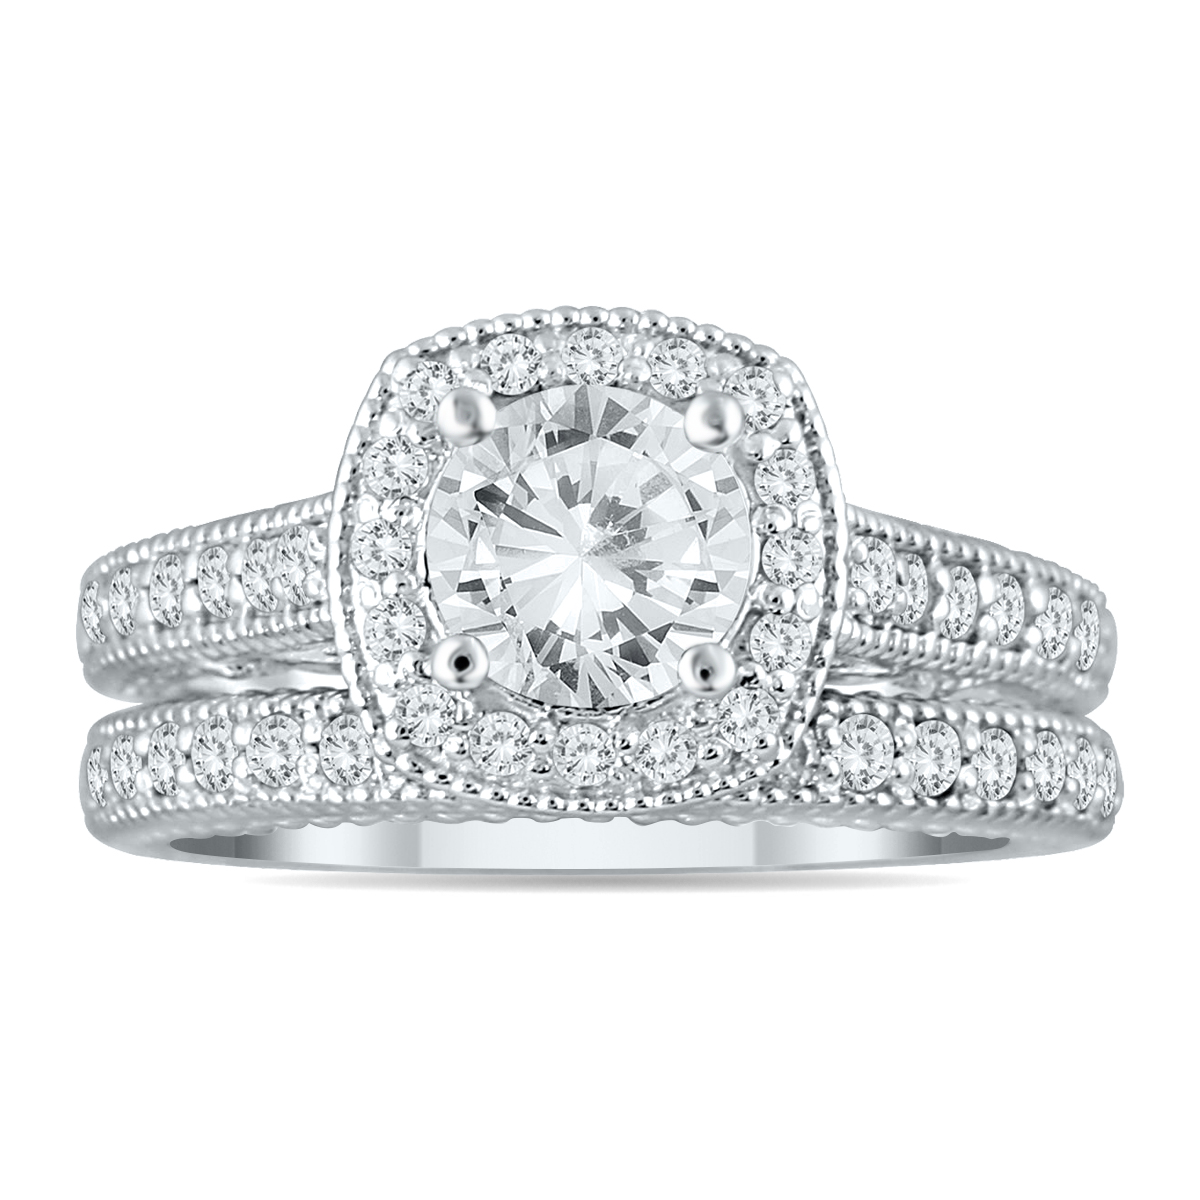 Image of AGS Certified 1 5/8 Carat TW Diamond Halo Bridal Set in 14K White Gold (I-J Color I2-I3 Clarity)